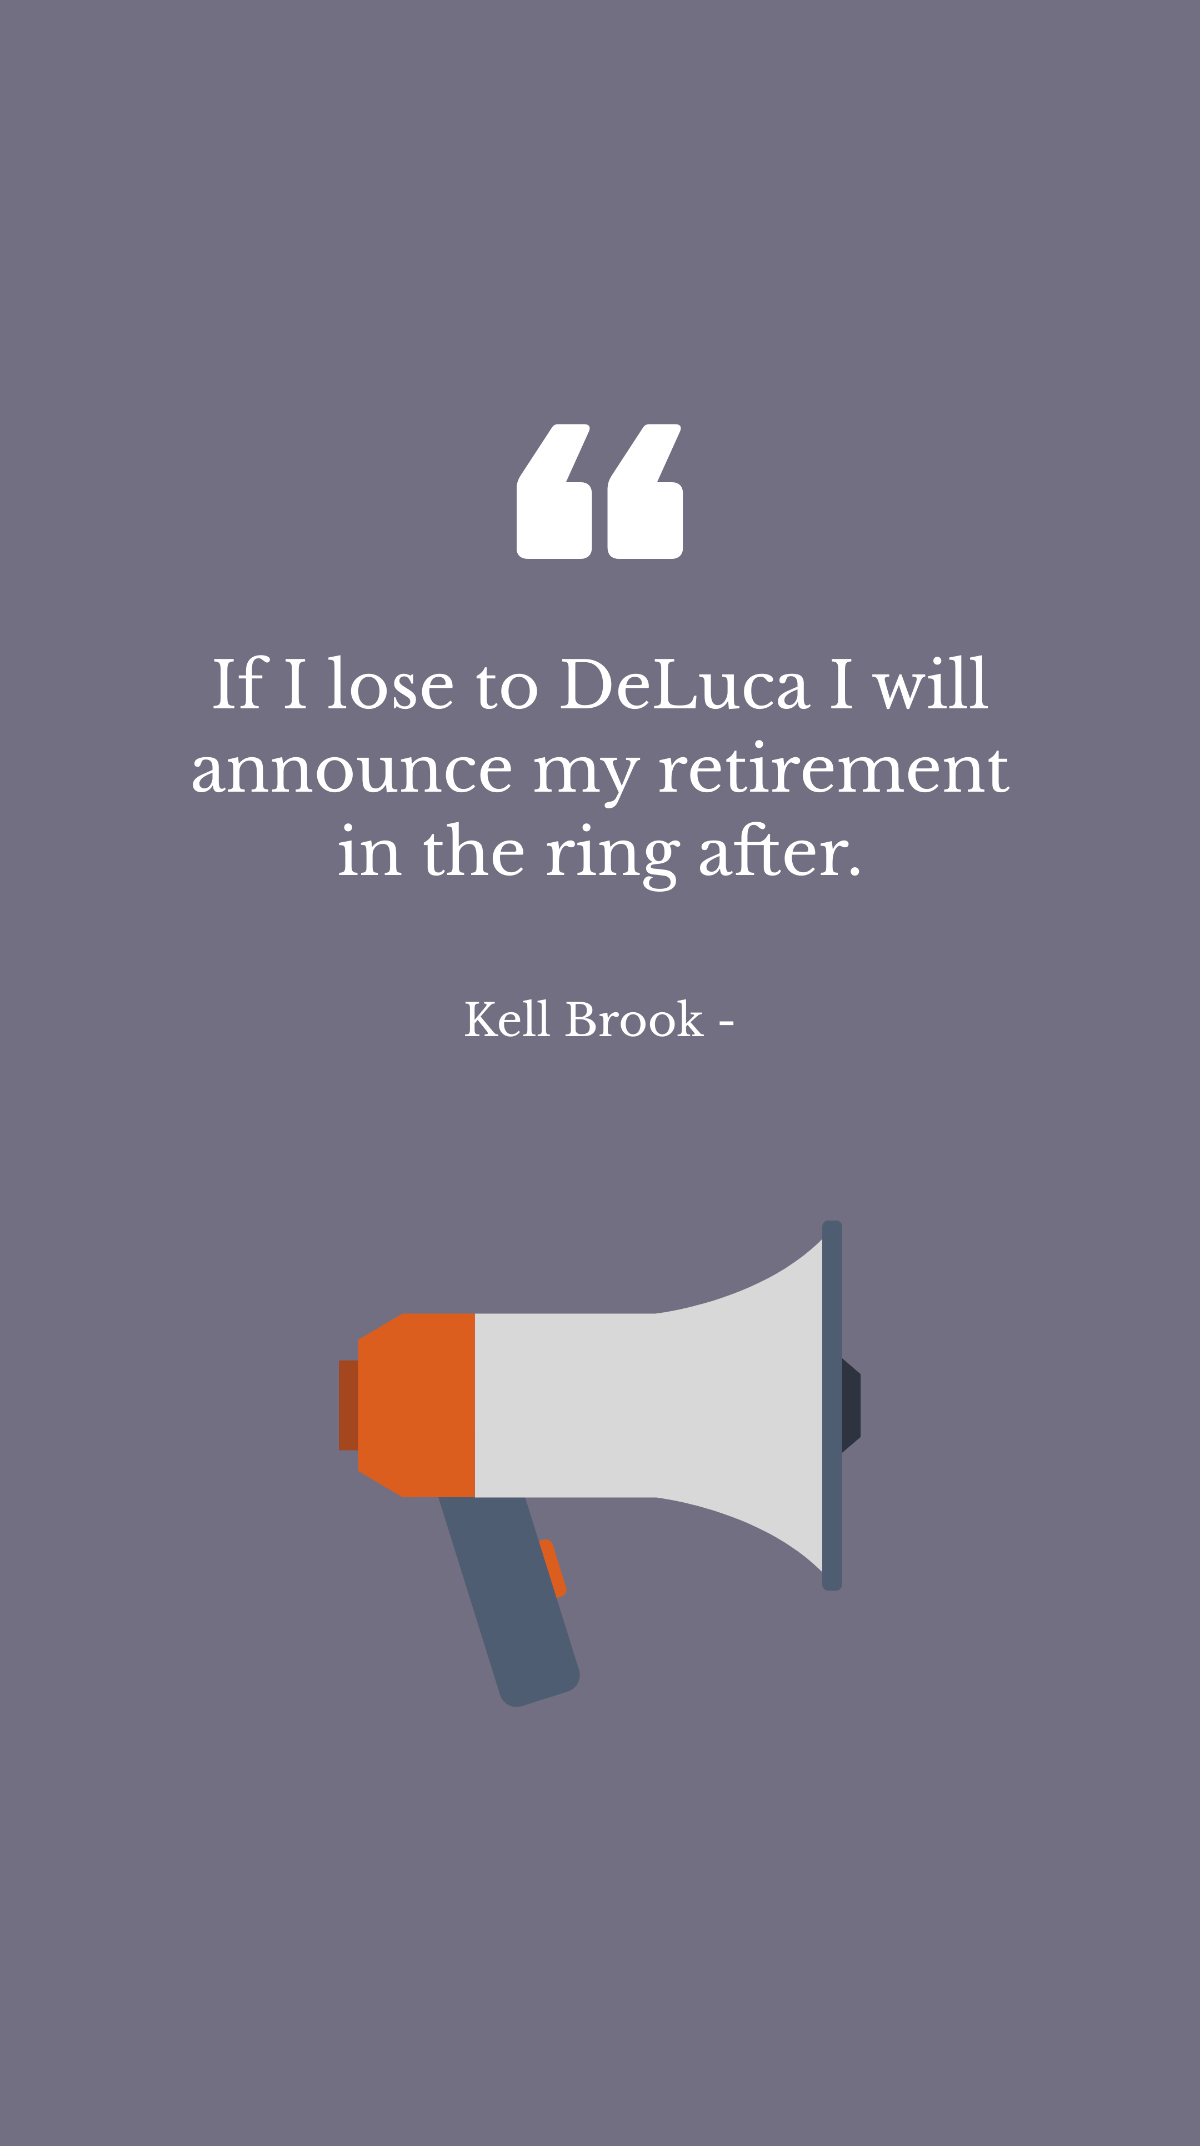 Kell Brook - If I lose to DeLuca I will announce my retirement in the ring after.